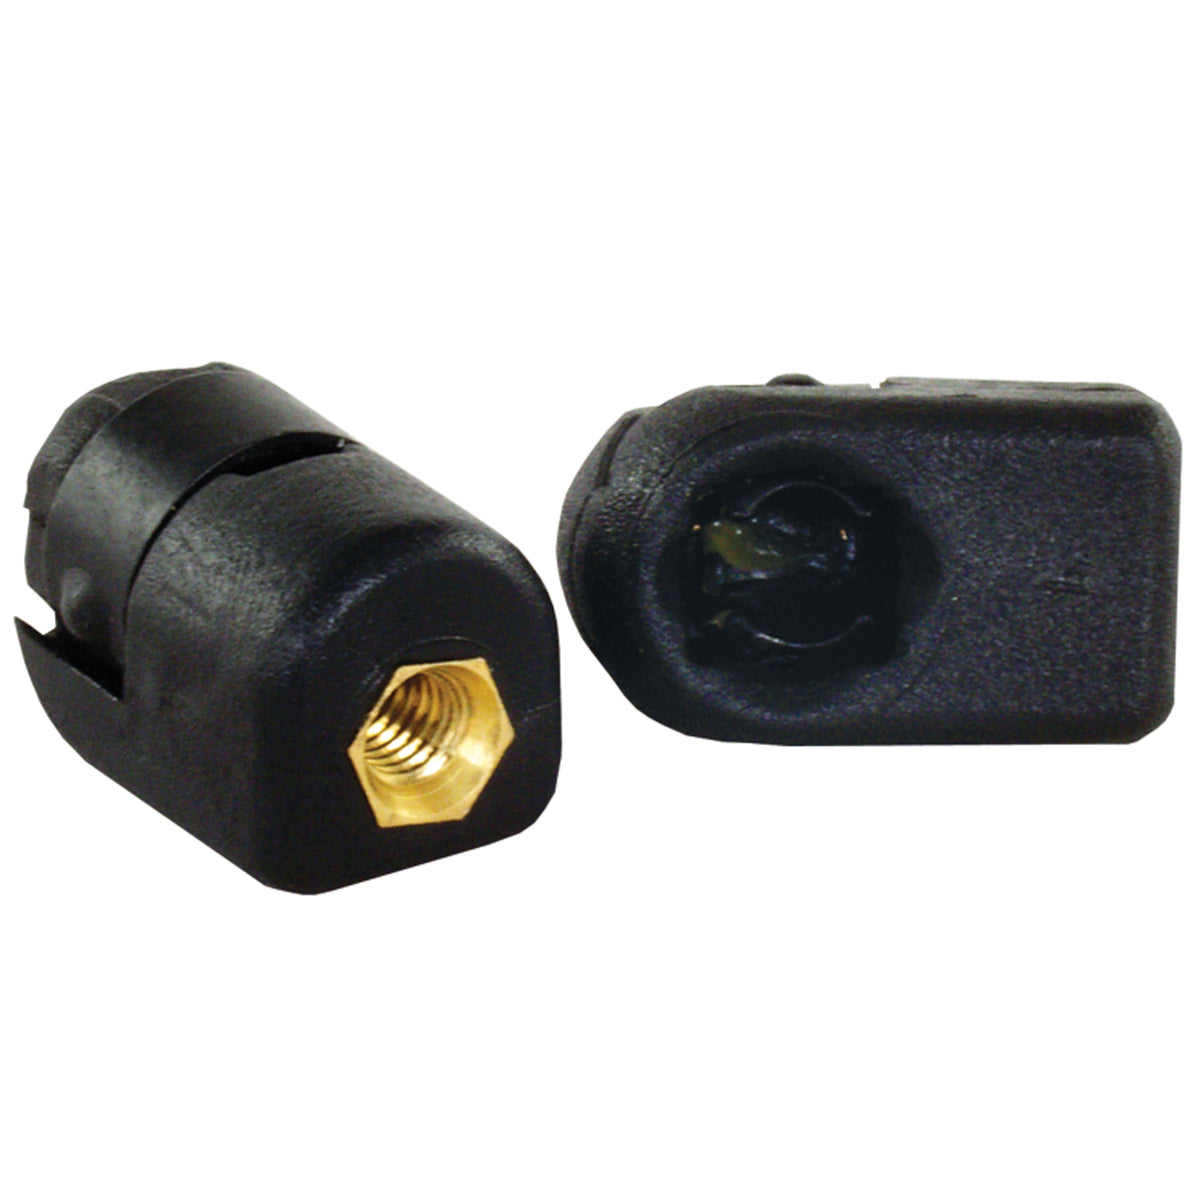 JR Products EF-PS300 Replacement End Fittings - 2 Pk